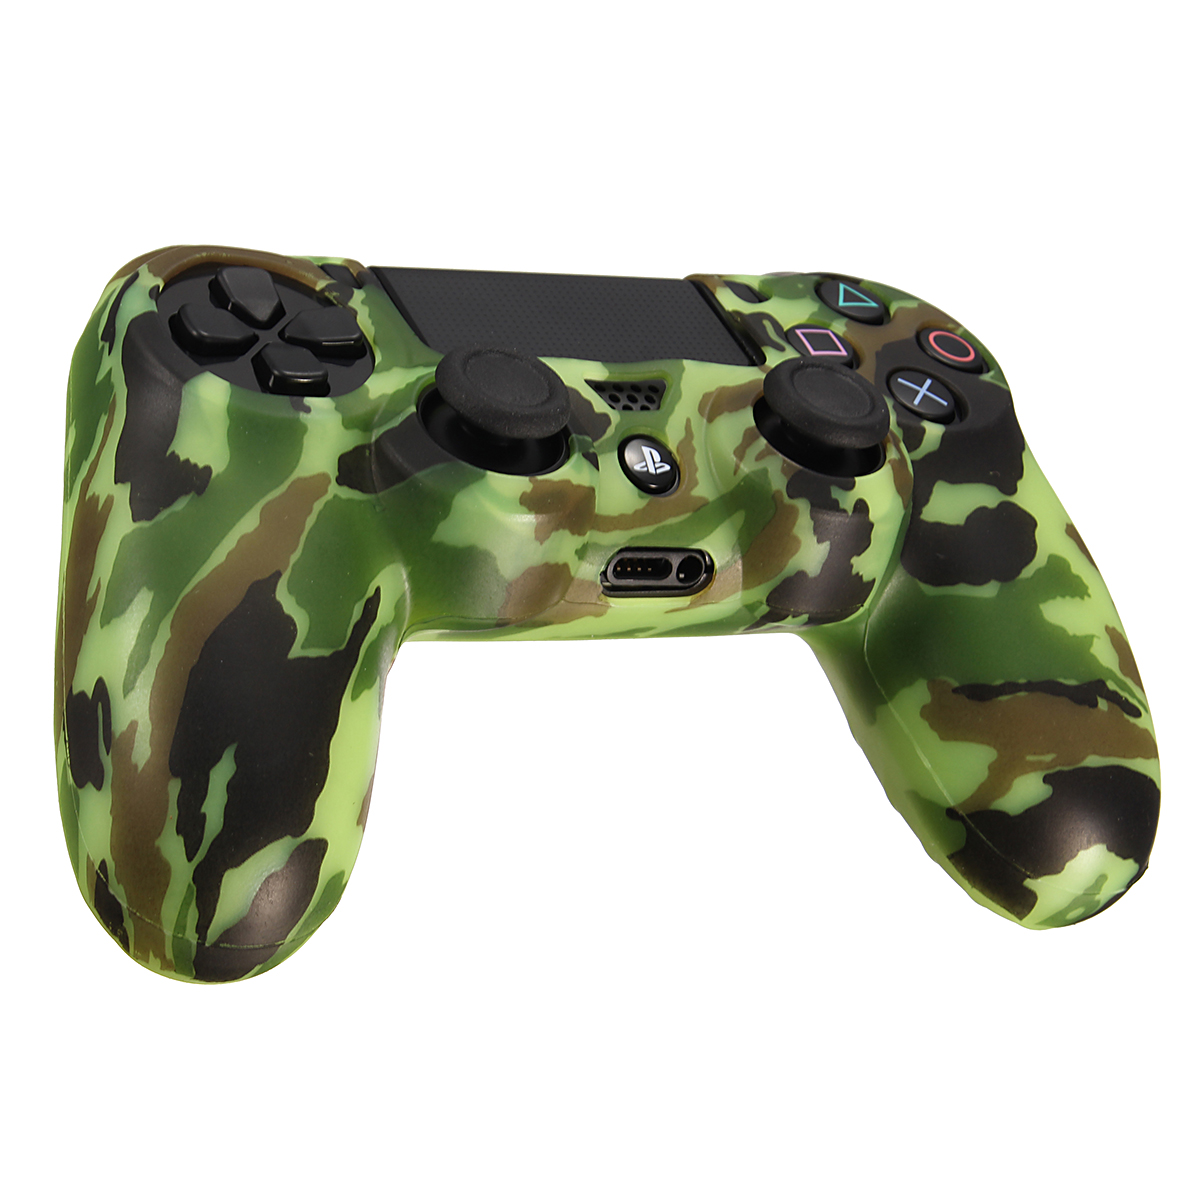 Durable Decal Camouflage Grip Cover Case Silicone Rubber Soft Skin Protector for Playstation 4 for Dualshock 4 Gamepad 23